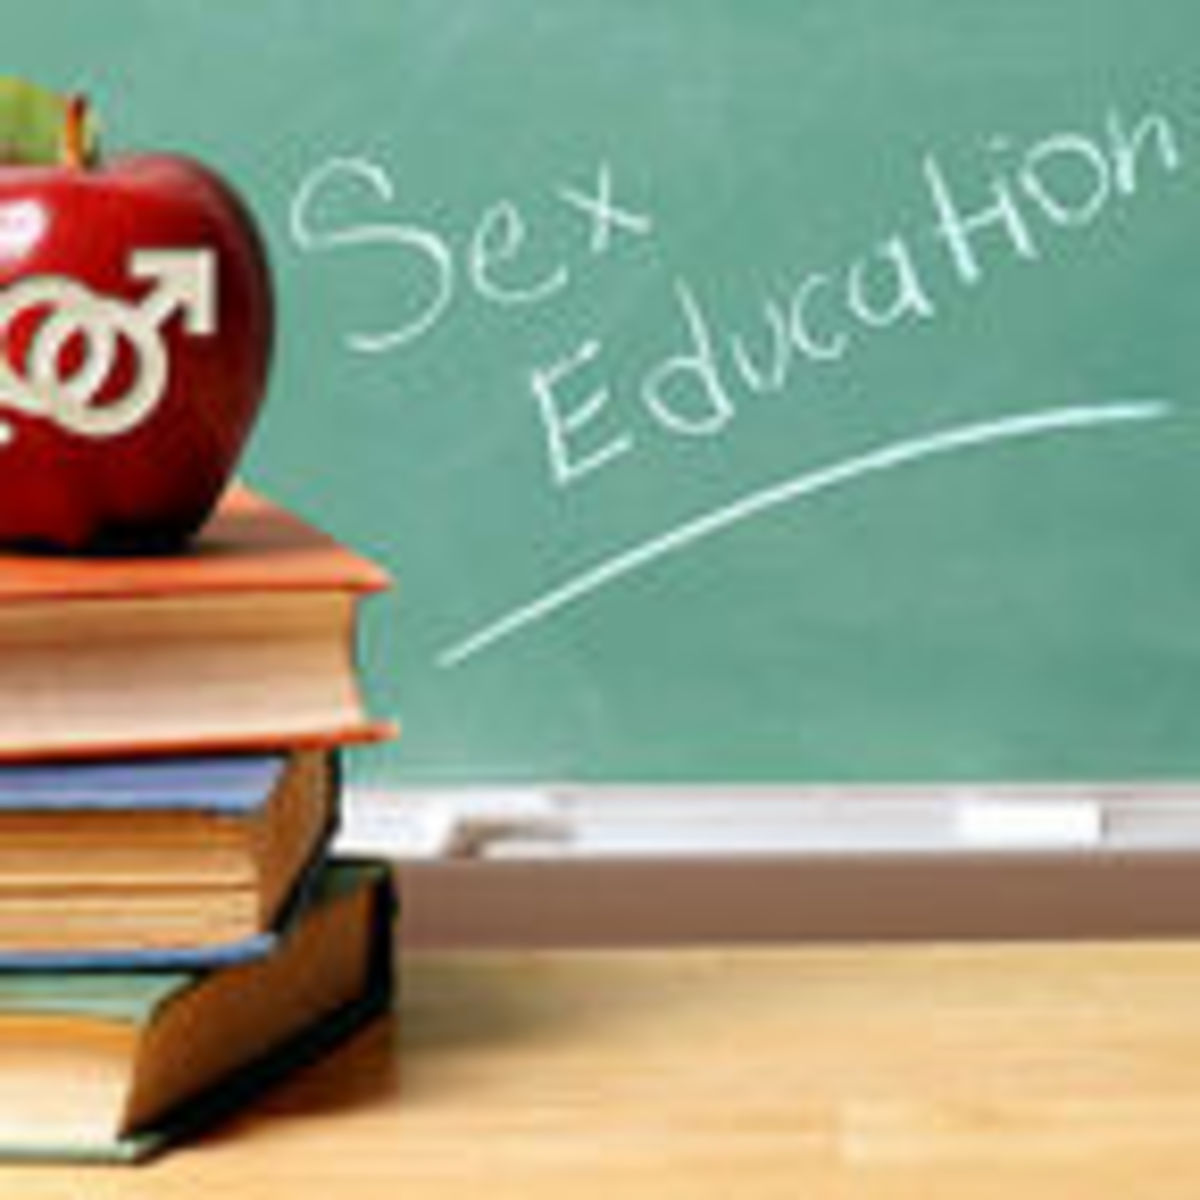 Dutch Sex Education - Funding Abstinence: The War on Sex Ed | Psychology Today